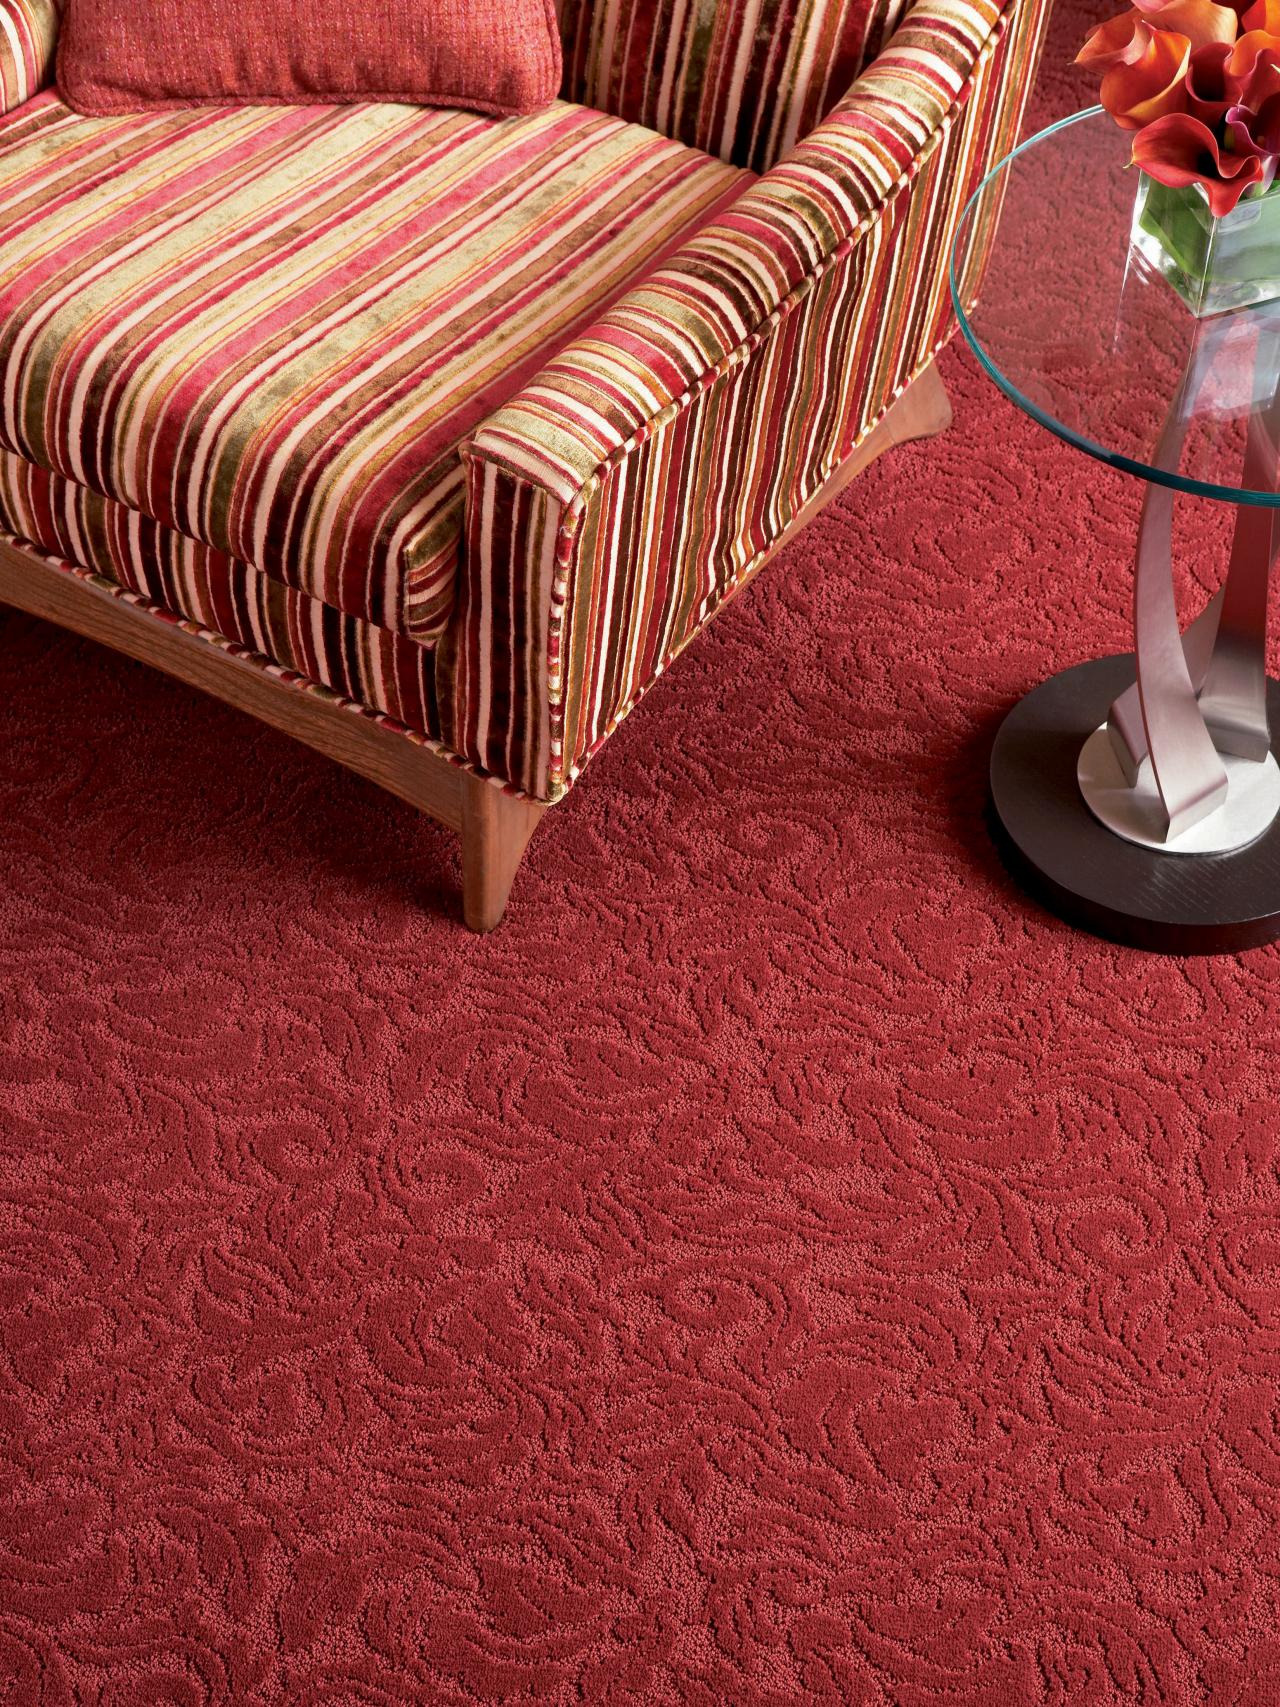 Today S Carpet Trends, Carpet Colors For Living Room